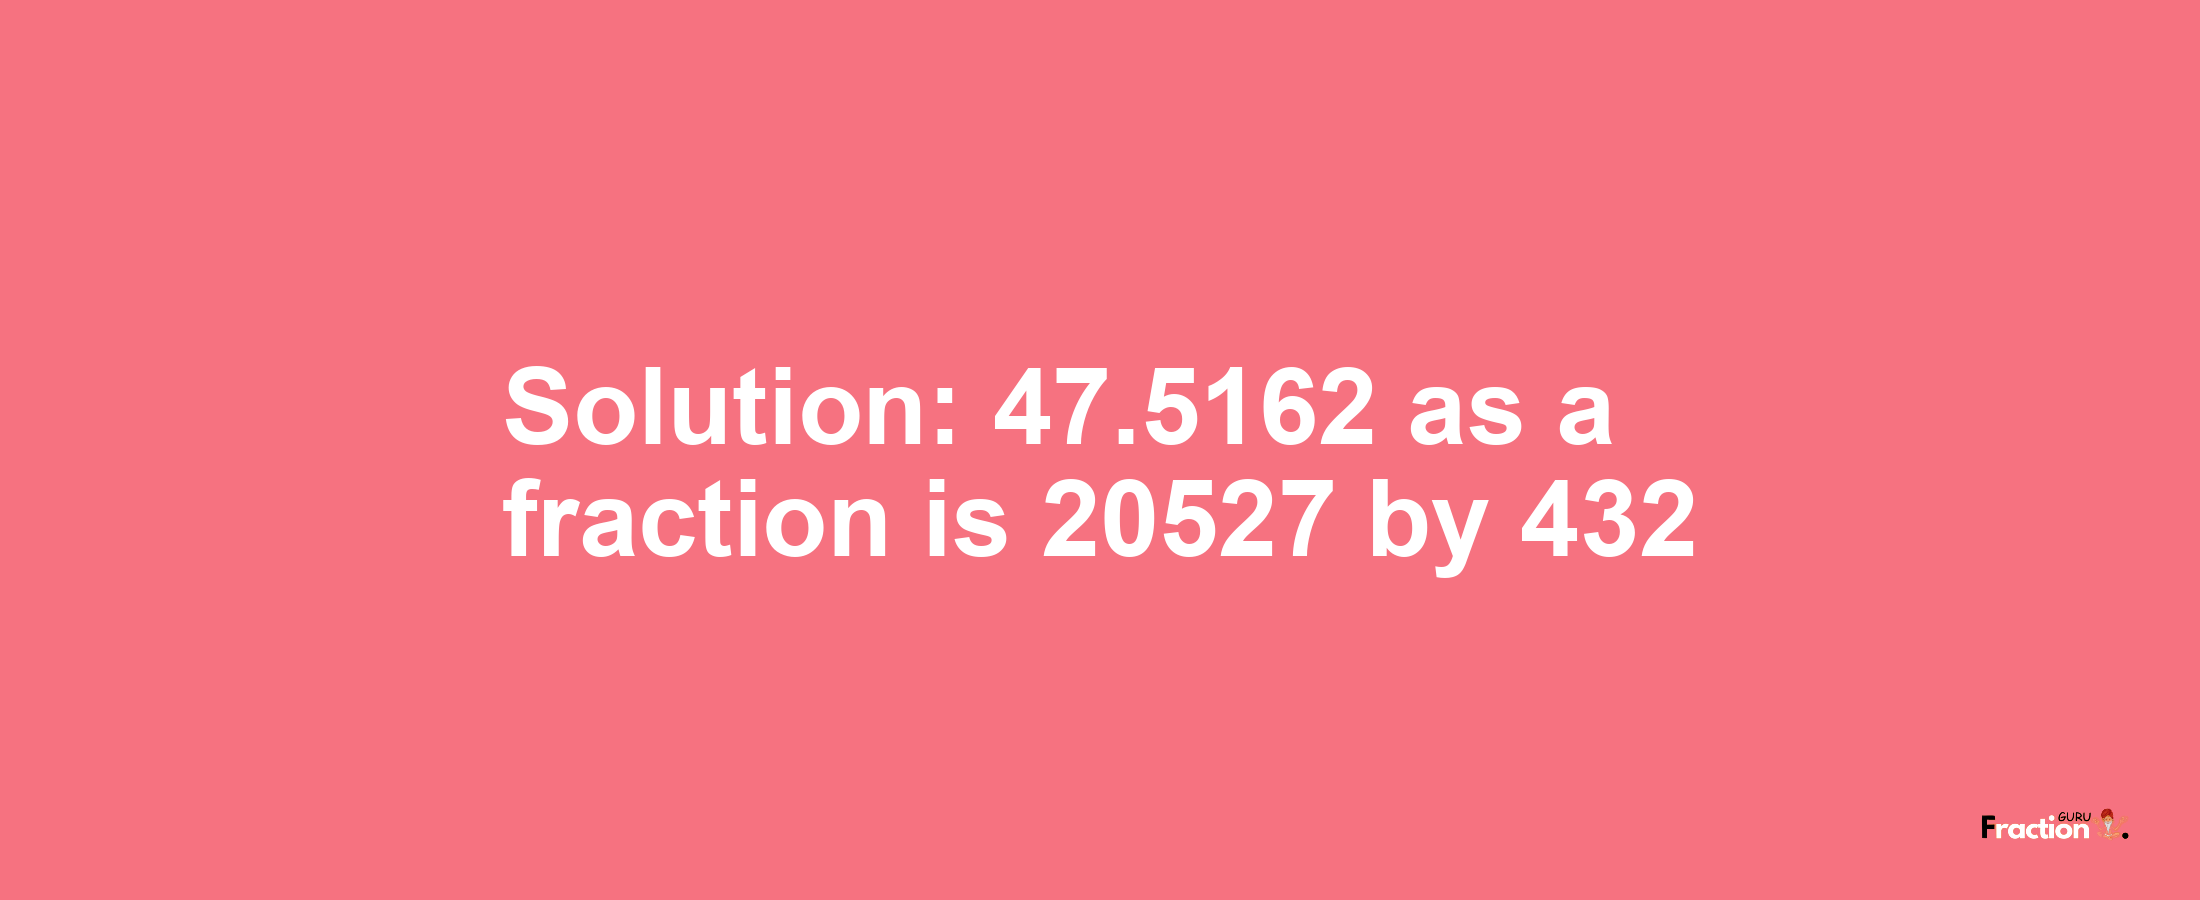 Solution:47.5162 as a fraction is 20527/432